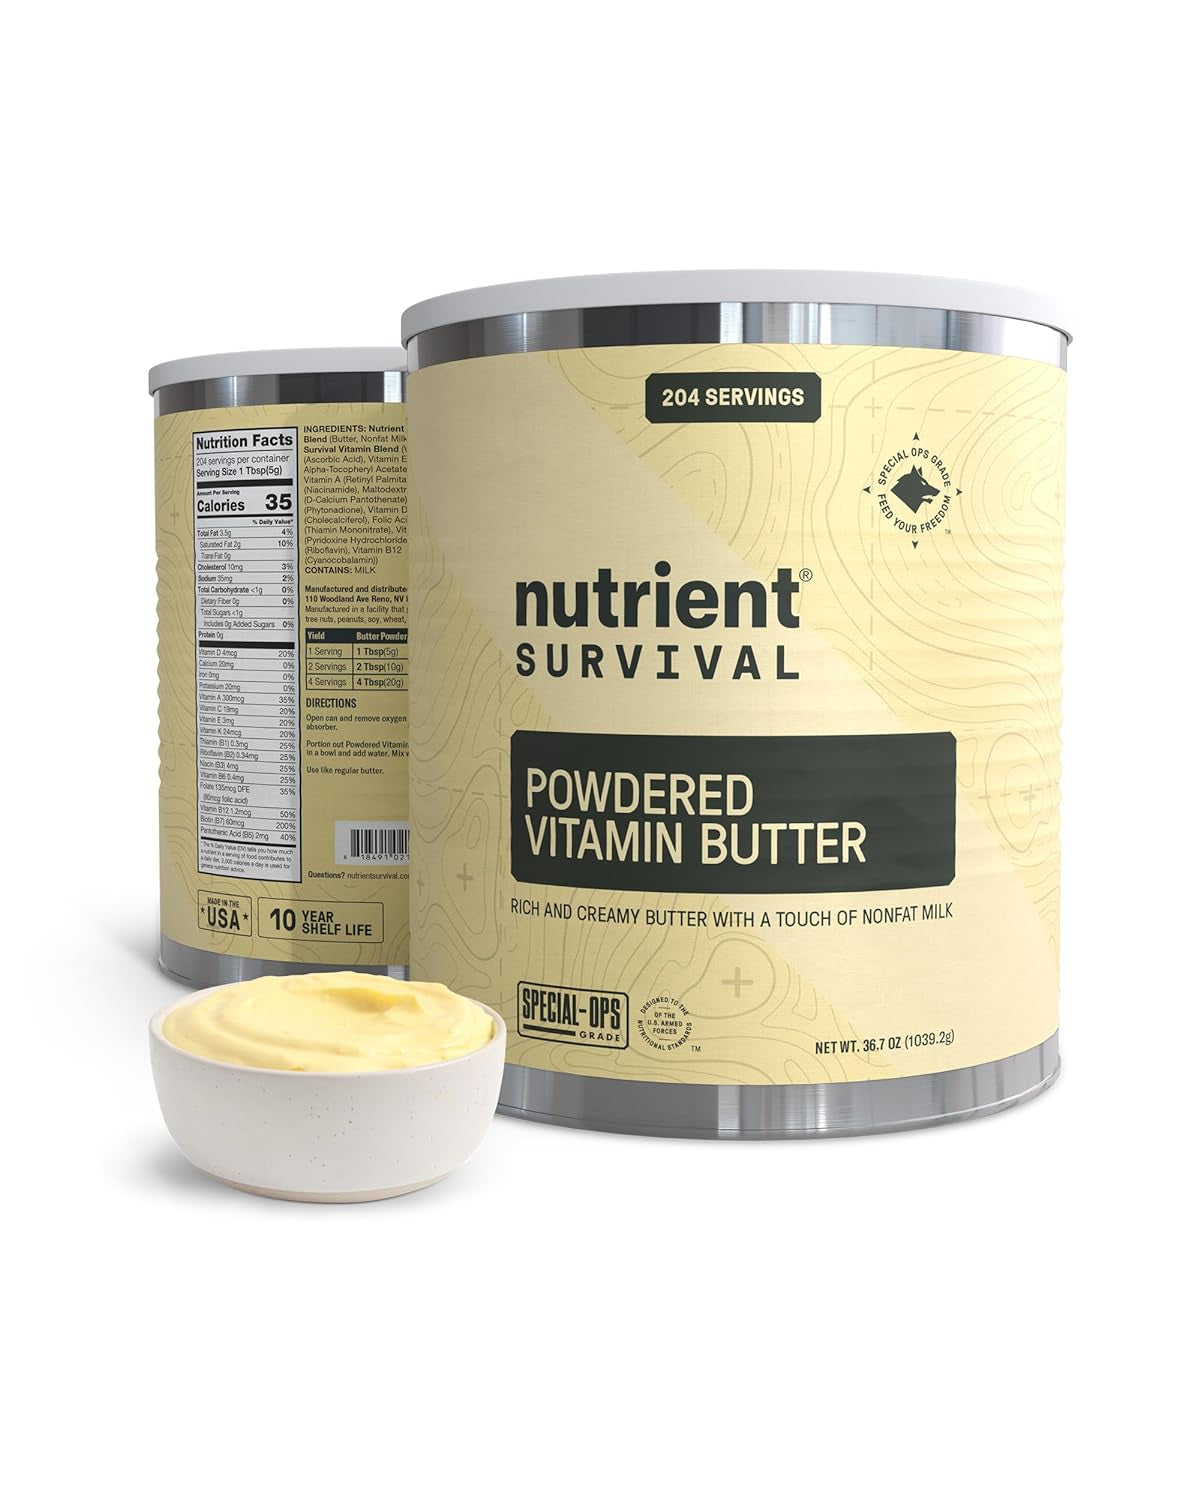 Vitamin Butter Powder, Freeze Dried Prepper Supplies & Emergency Food Supply, 16 Essential Nutrients, Soy & Gluten Free, Shelf Stable up to 10 Years, One Can, 204 Servings